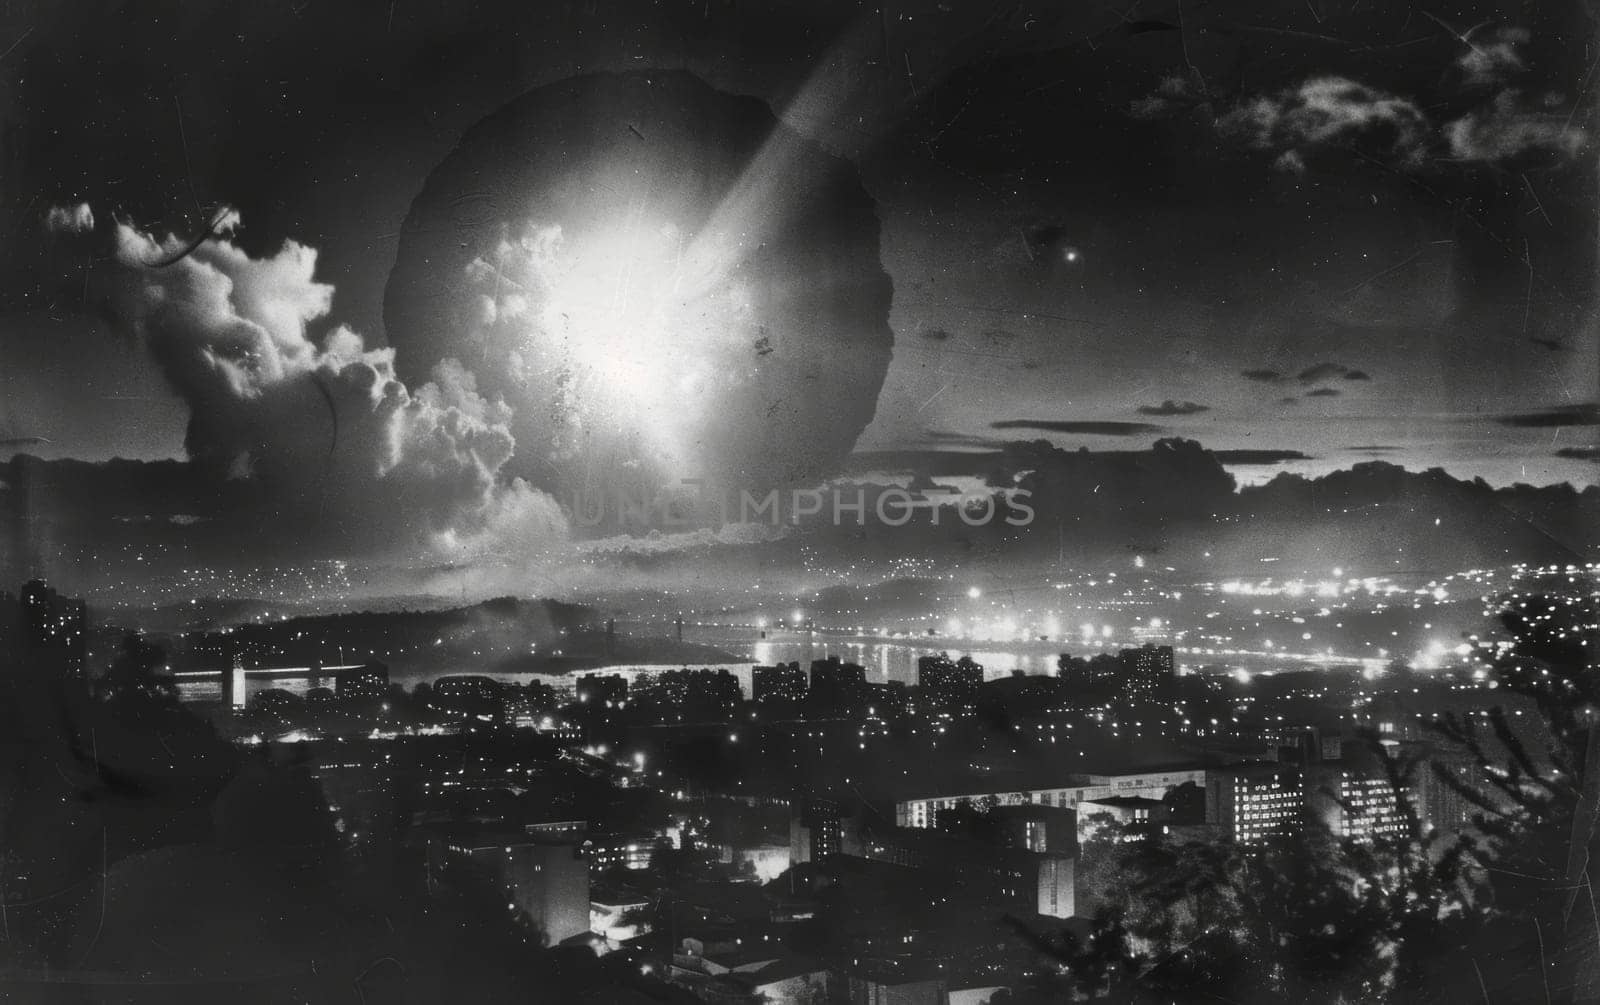 A vintage black and white photo captures a dramatic explosion illuminating the night sky over a cityscape, evoking a sense of historical drama and urgency.